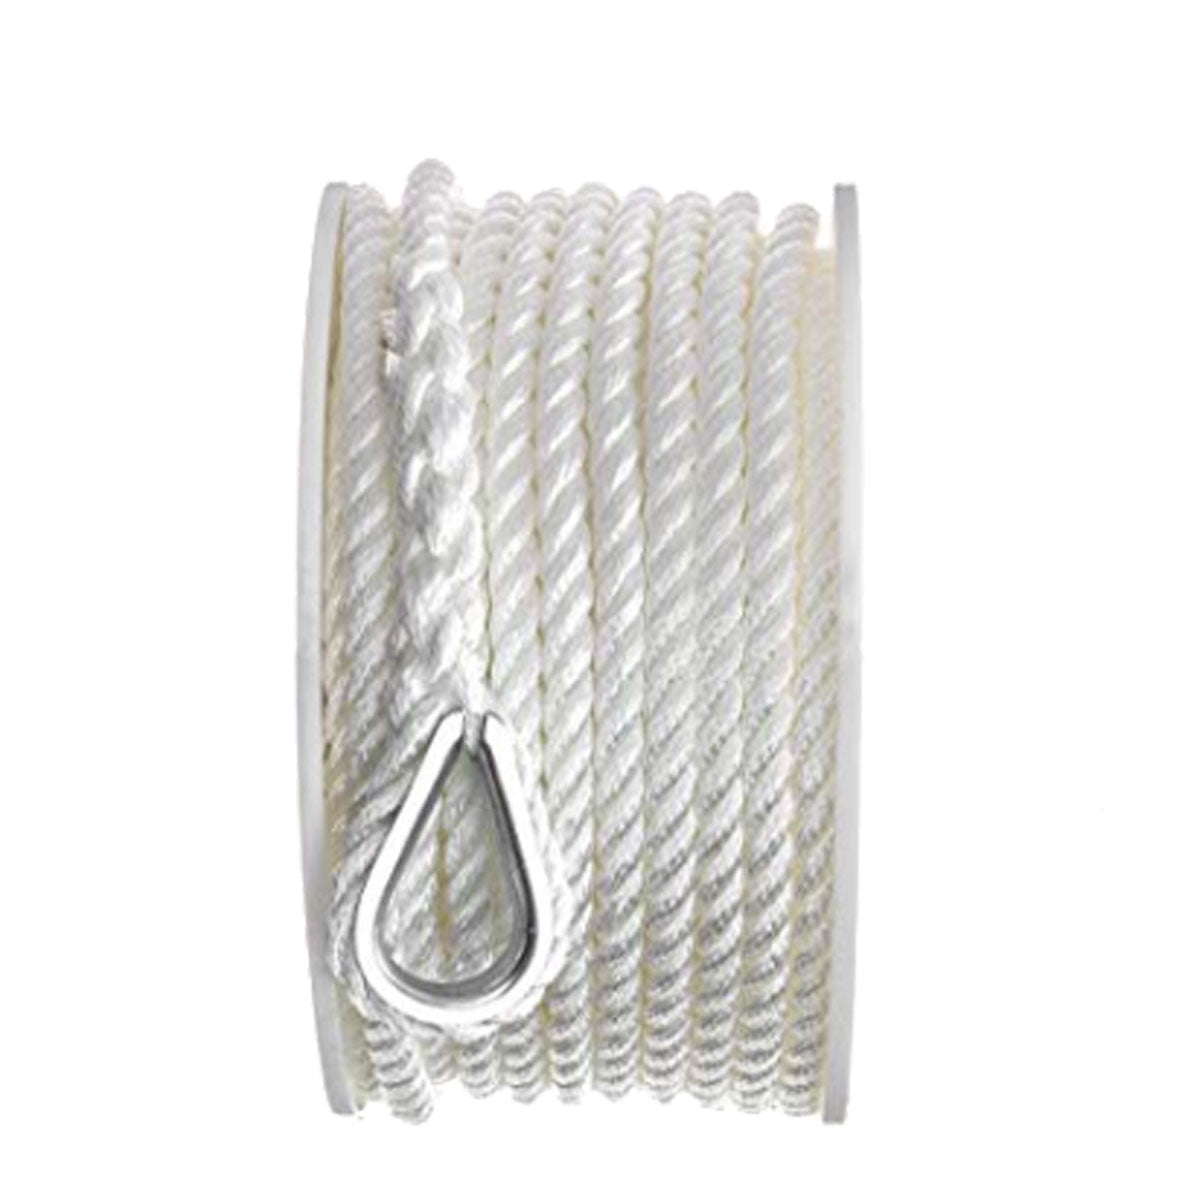 1/2x200FT Boat Anchor Line Rope 3 Strand Twisted White Rope With